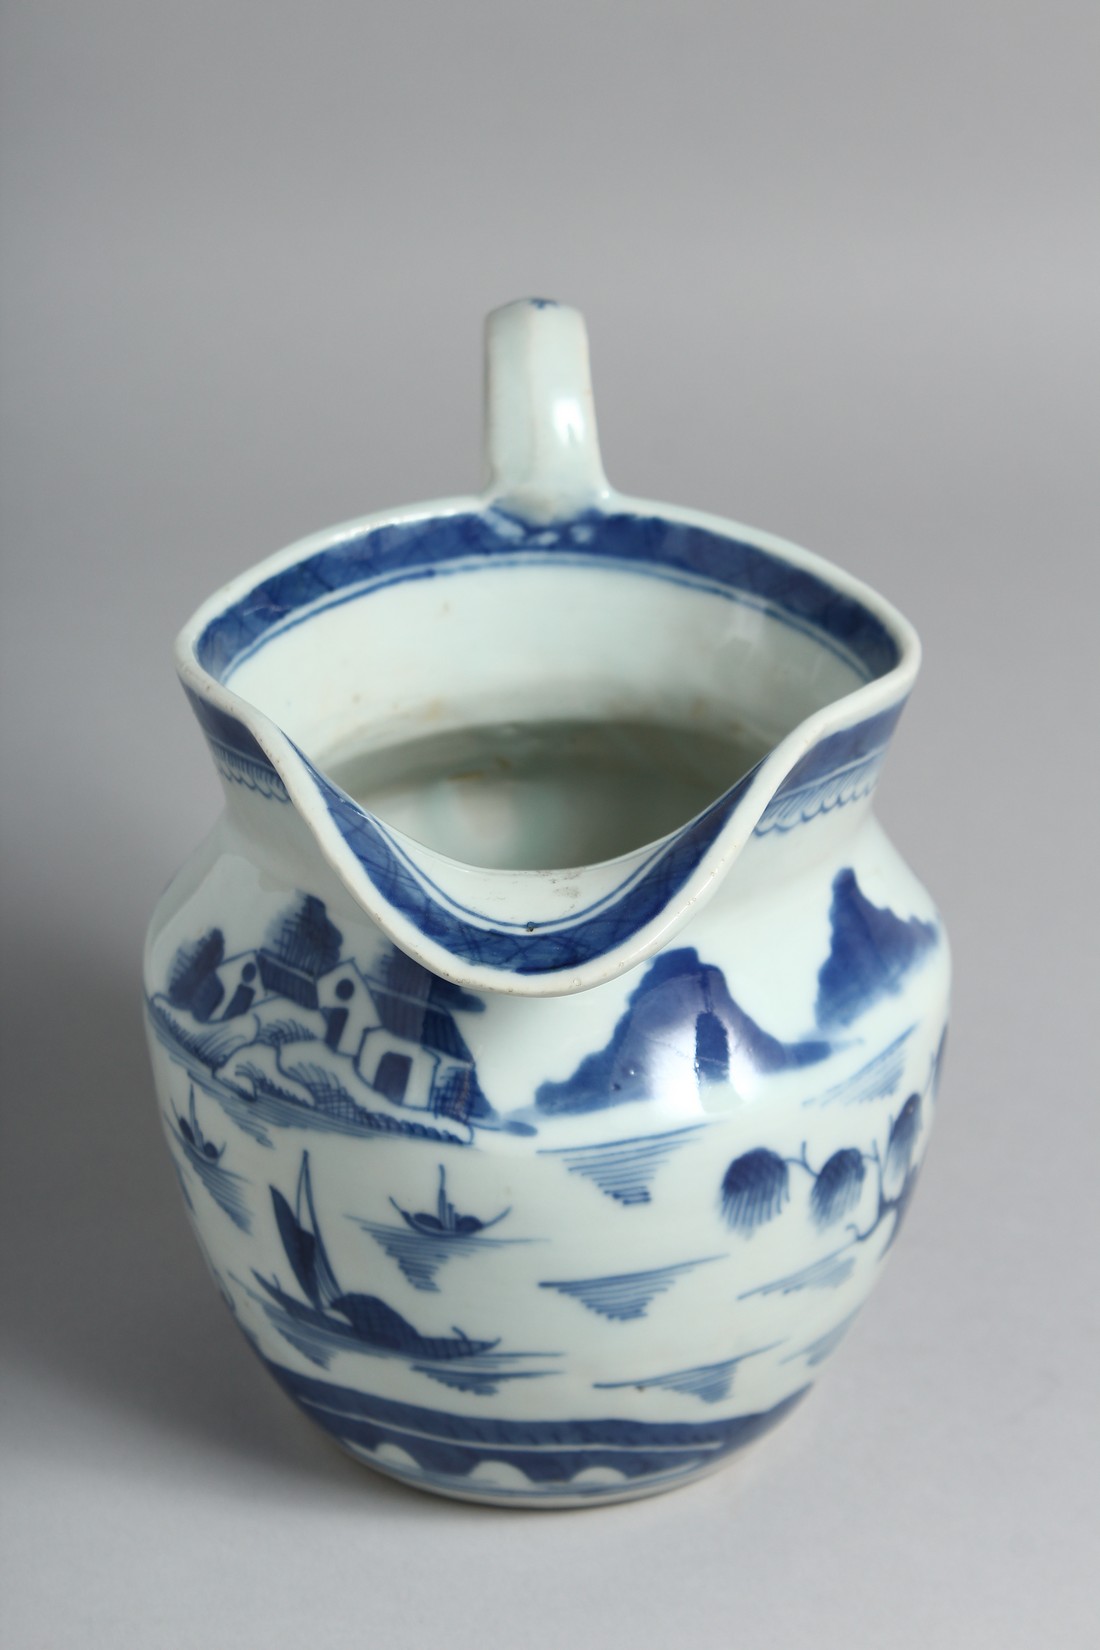 A CHINESE BLUE AND WHITE PORCELAIN JUG decorated with a landscape scene with boats and buildings. - Image 4 of 5